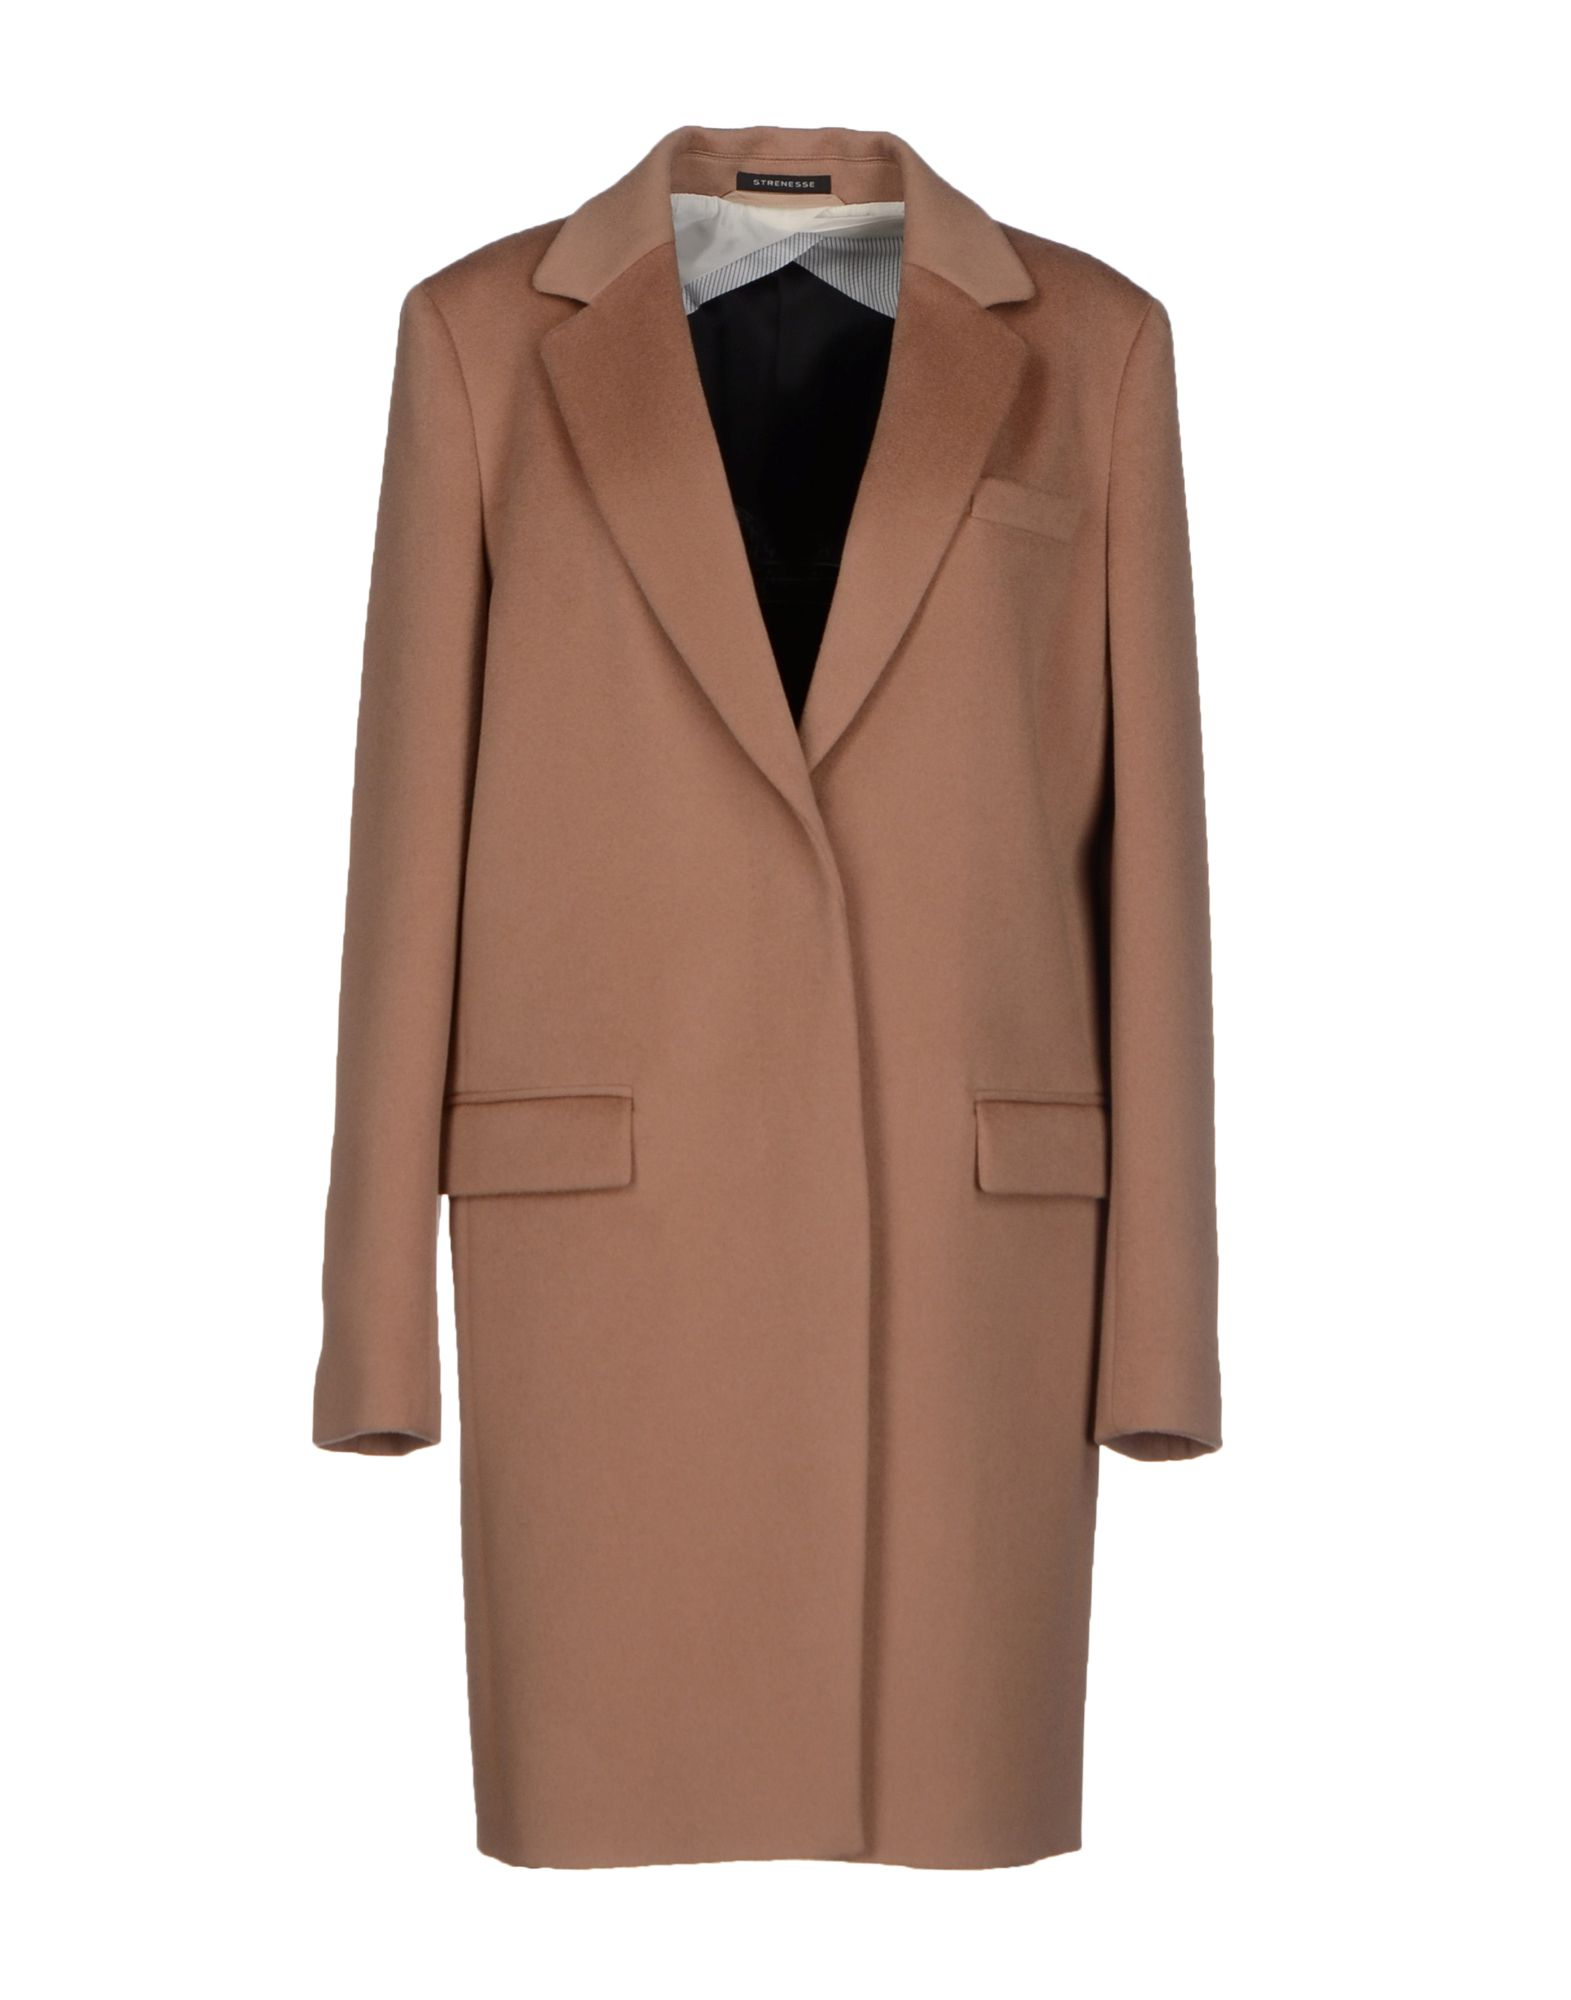 Strenesse gabriele strehle Coat in Brown (Camel) | Lyst